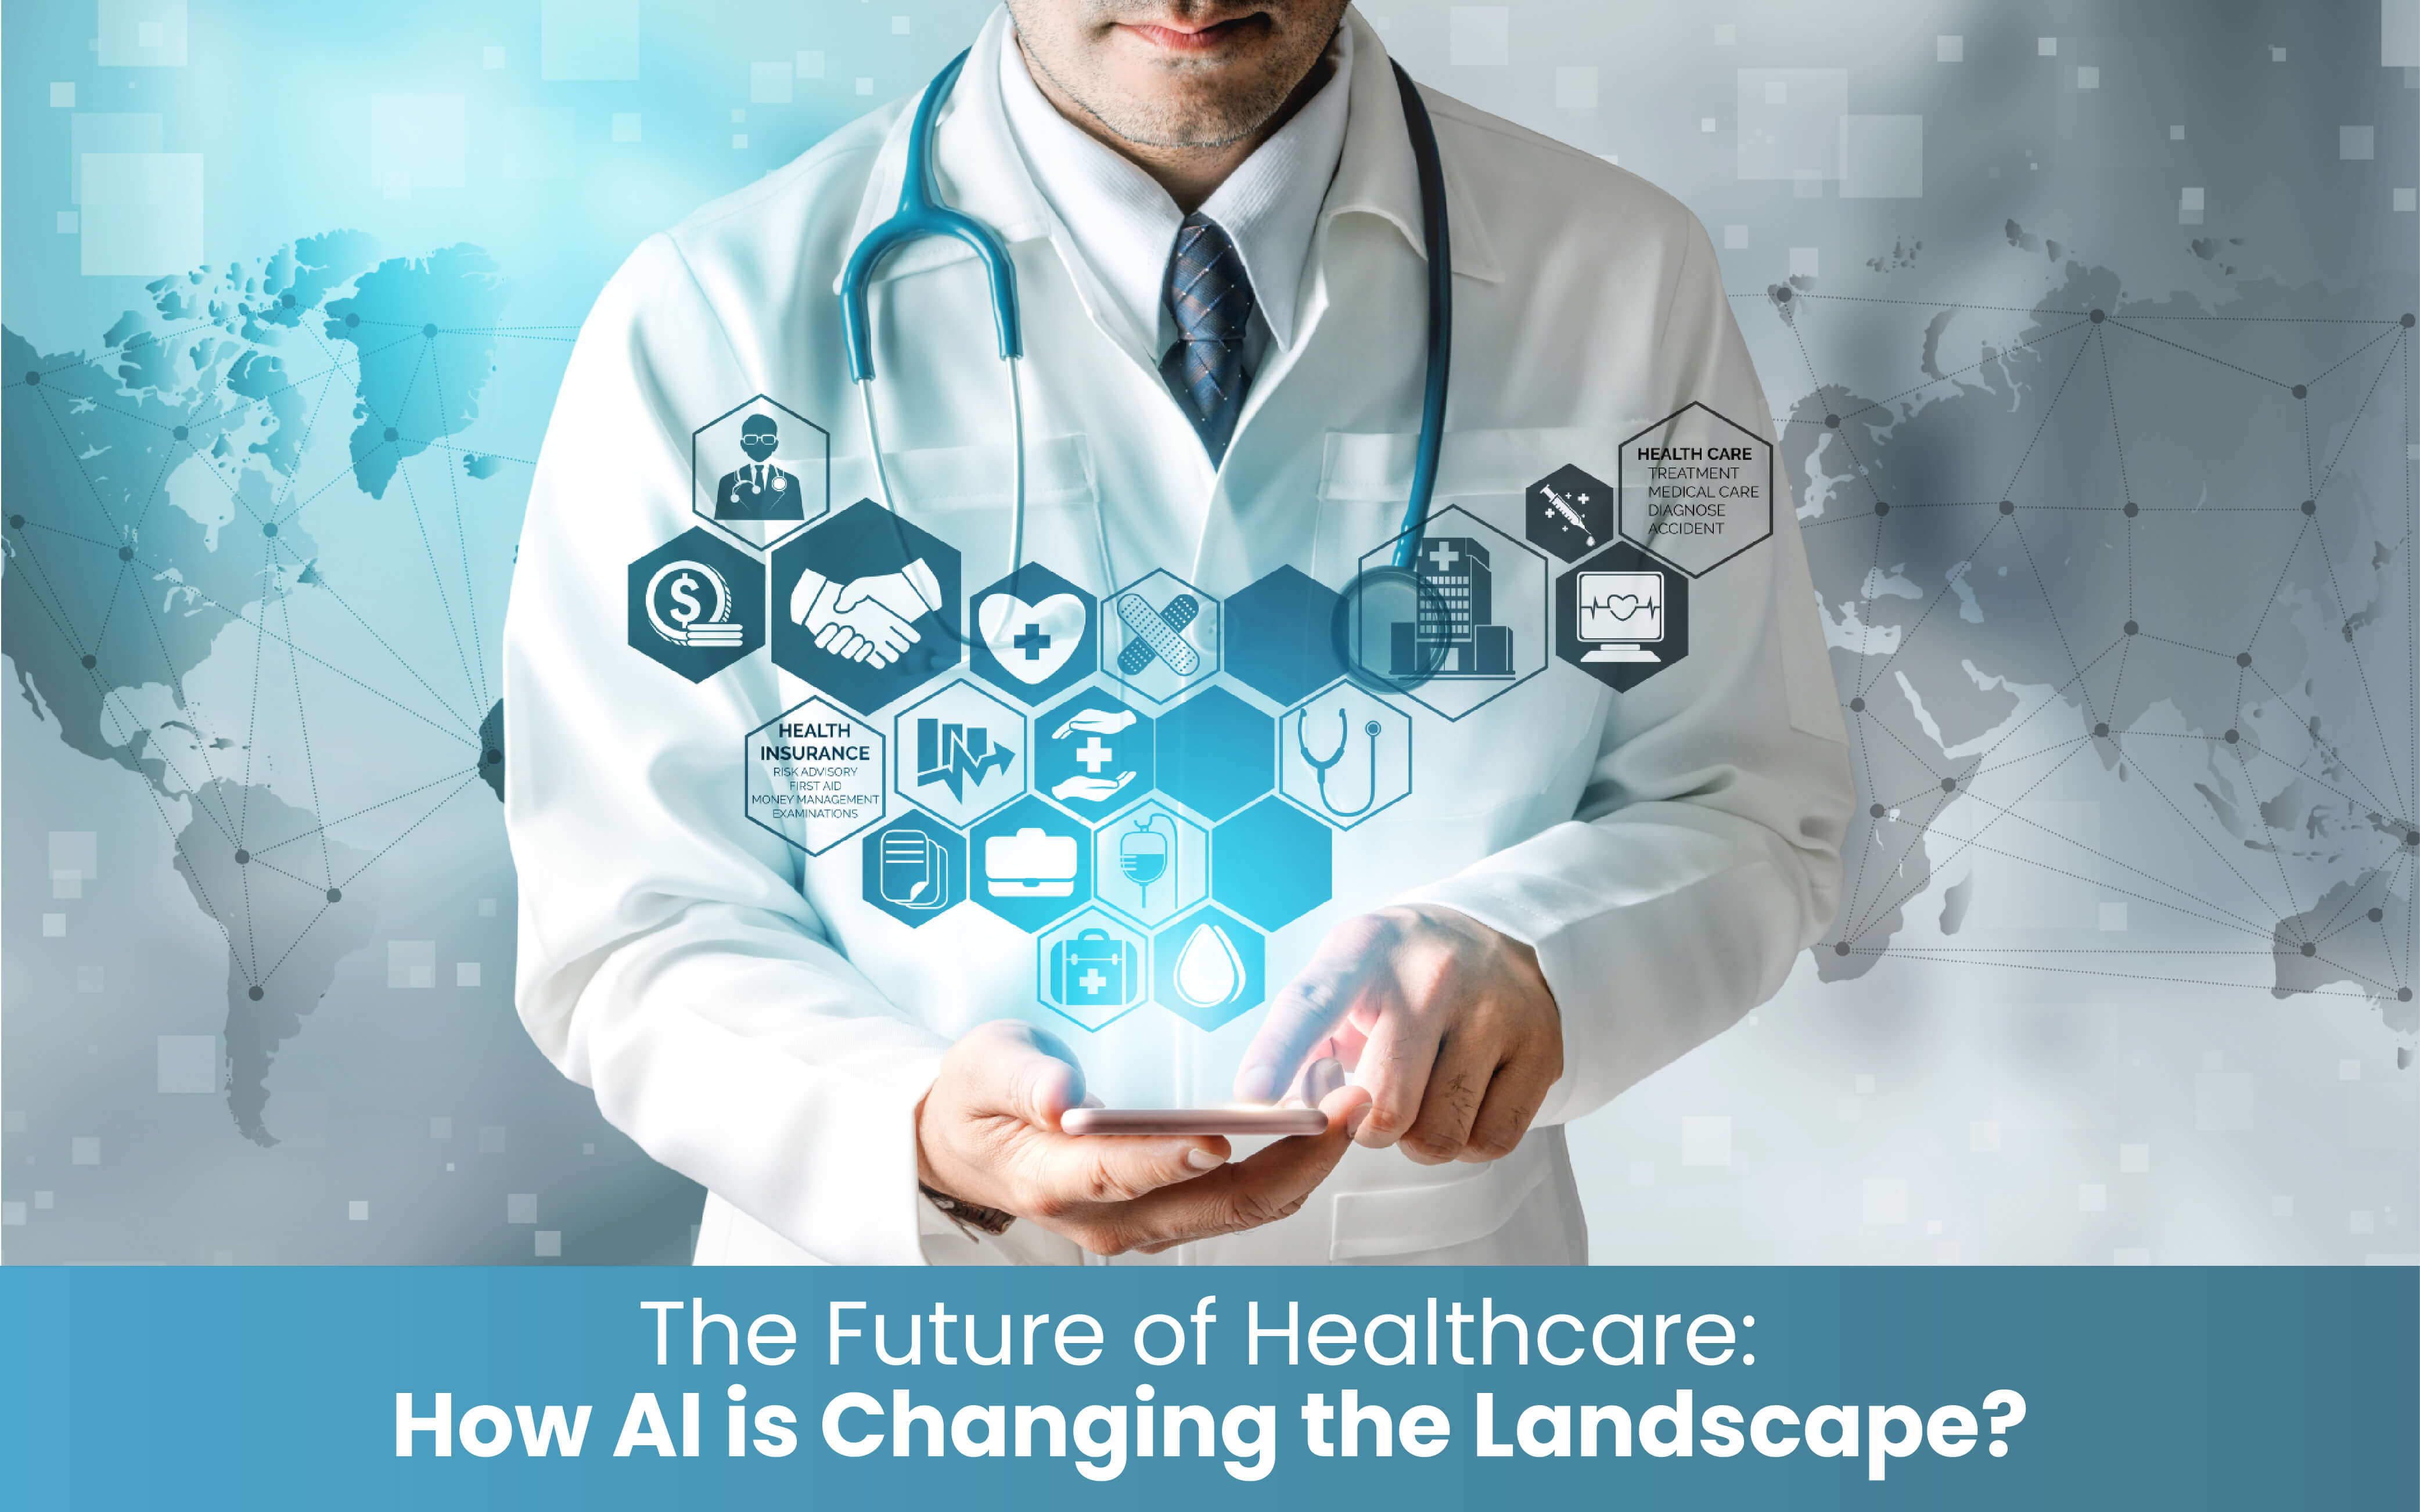 The Future of Healthcare: How AI is Changing the Landscape?